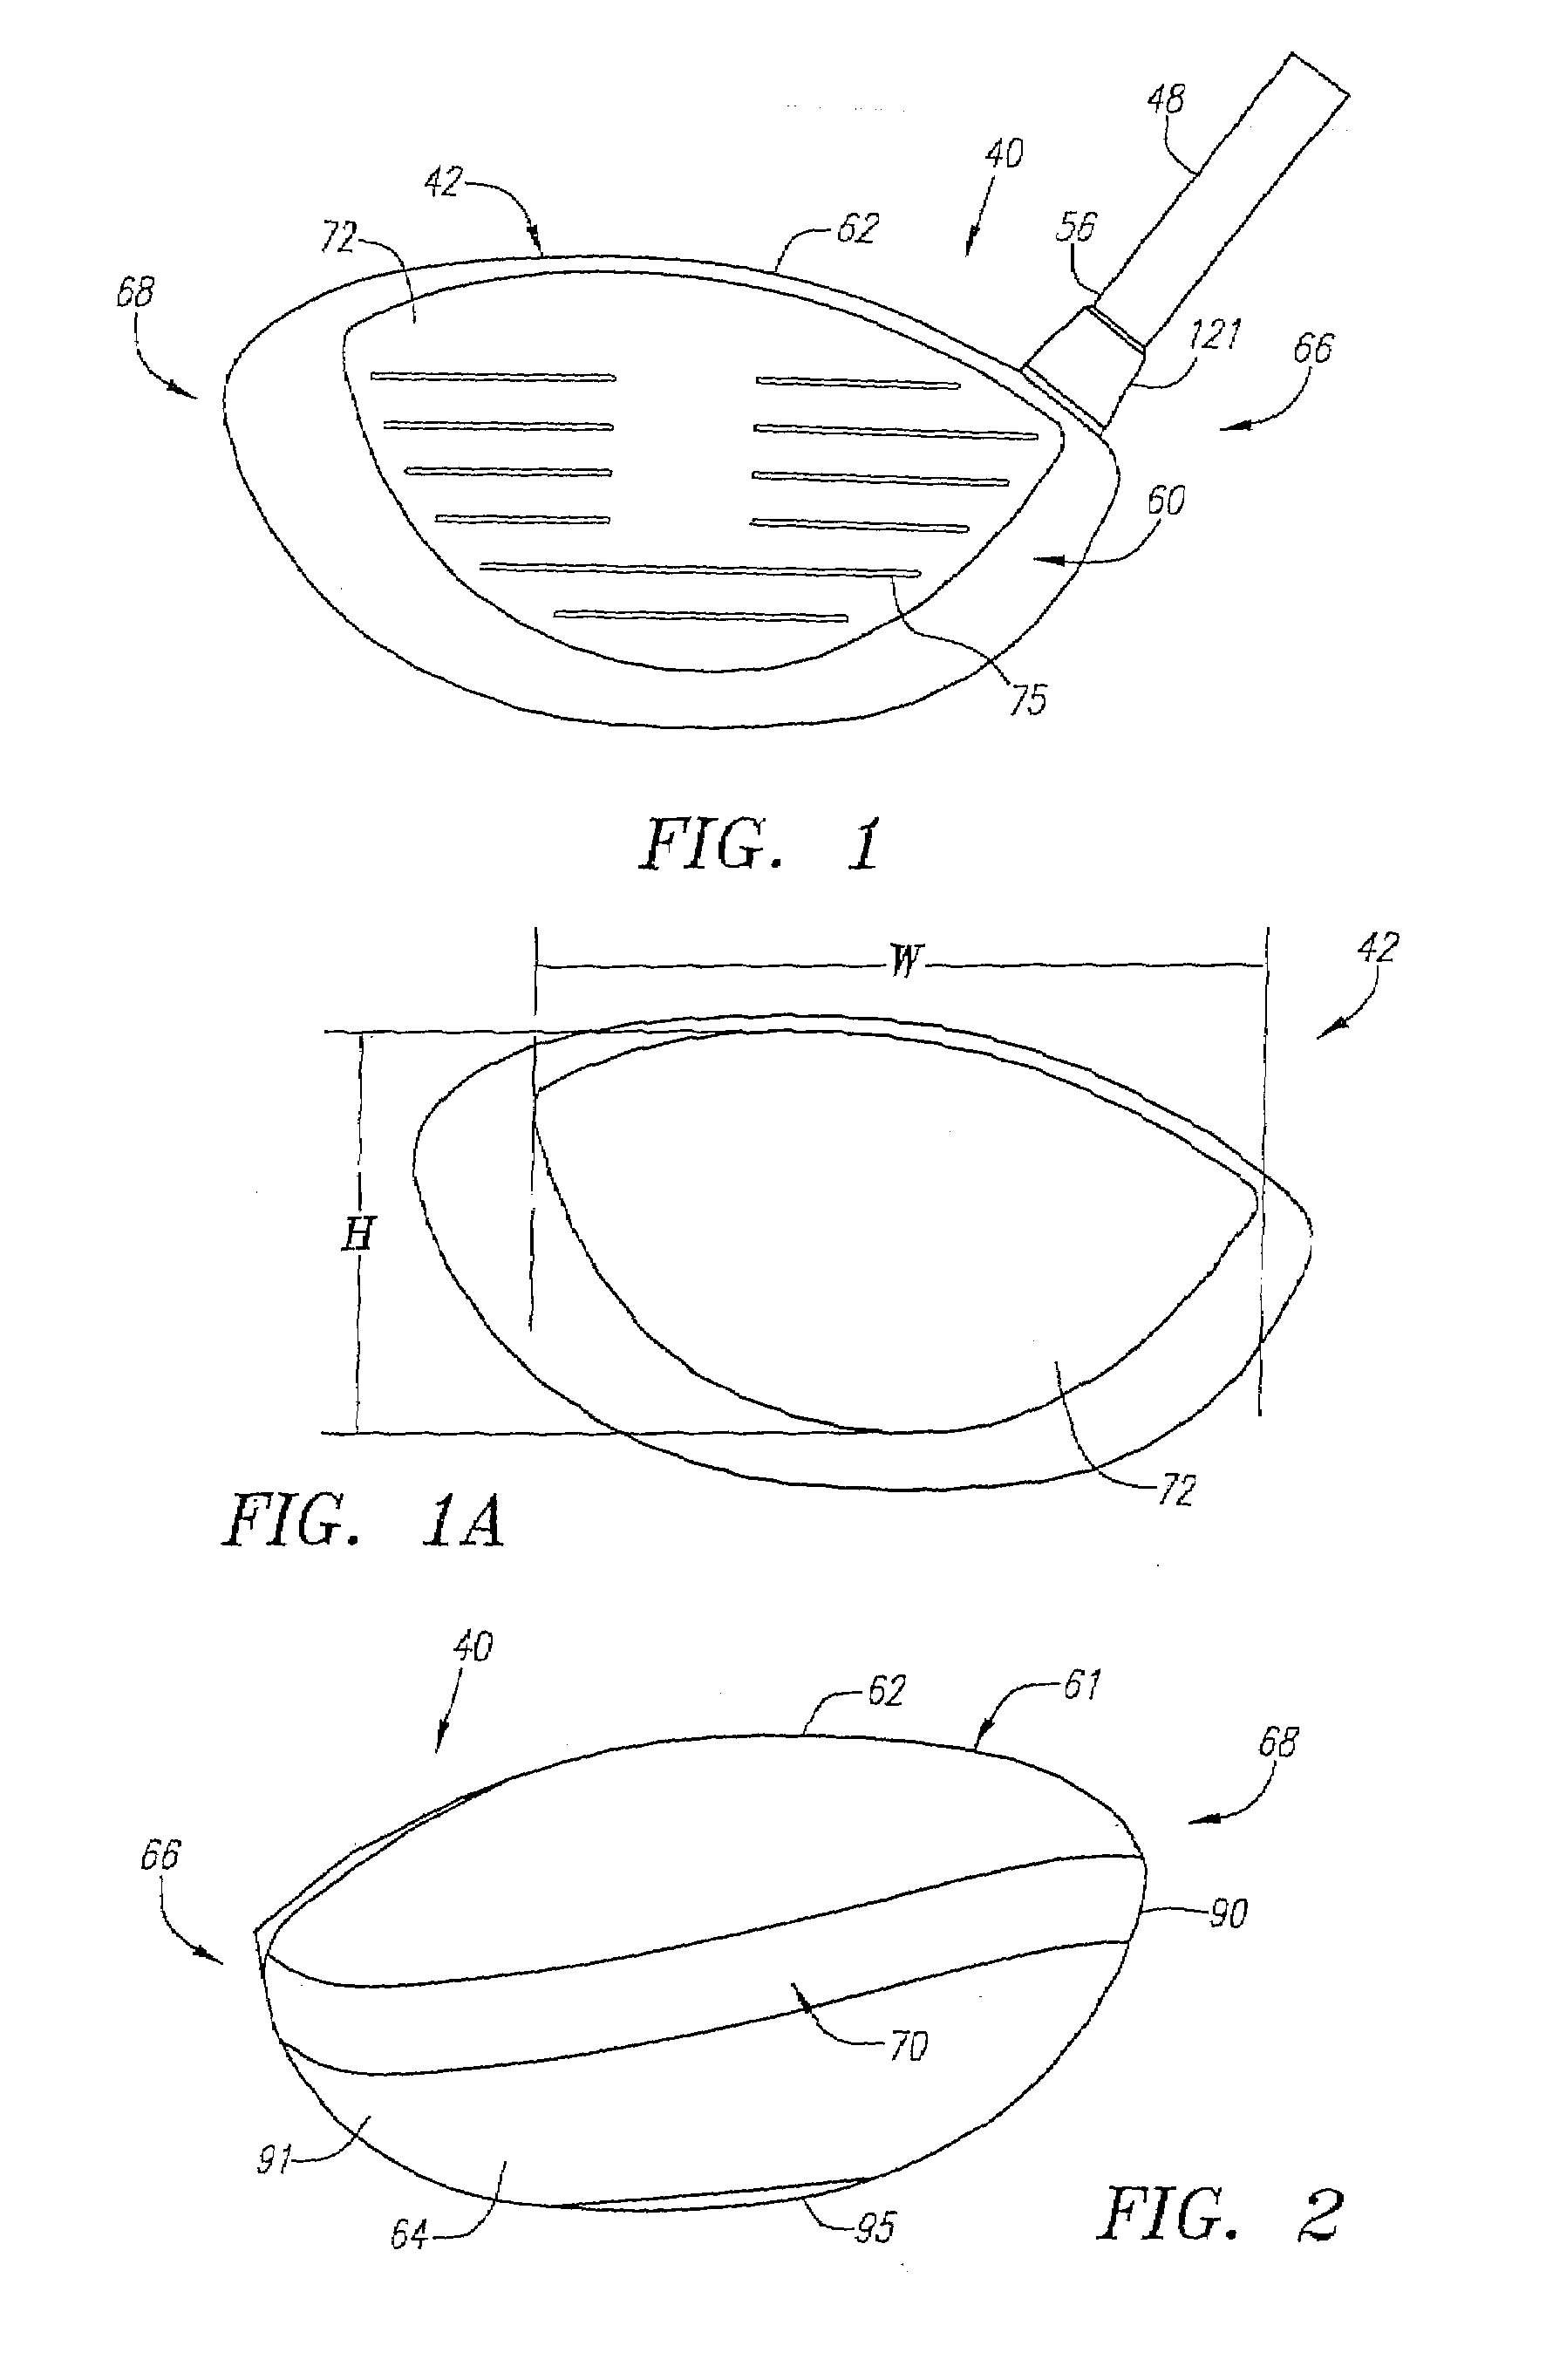 Method for processing a golf club head with cup shaped face component